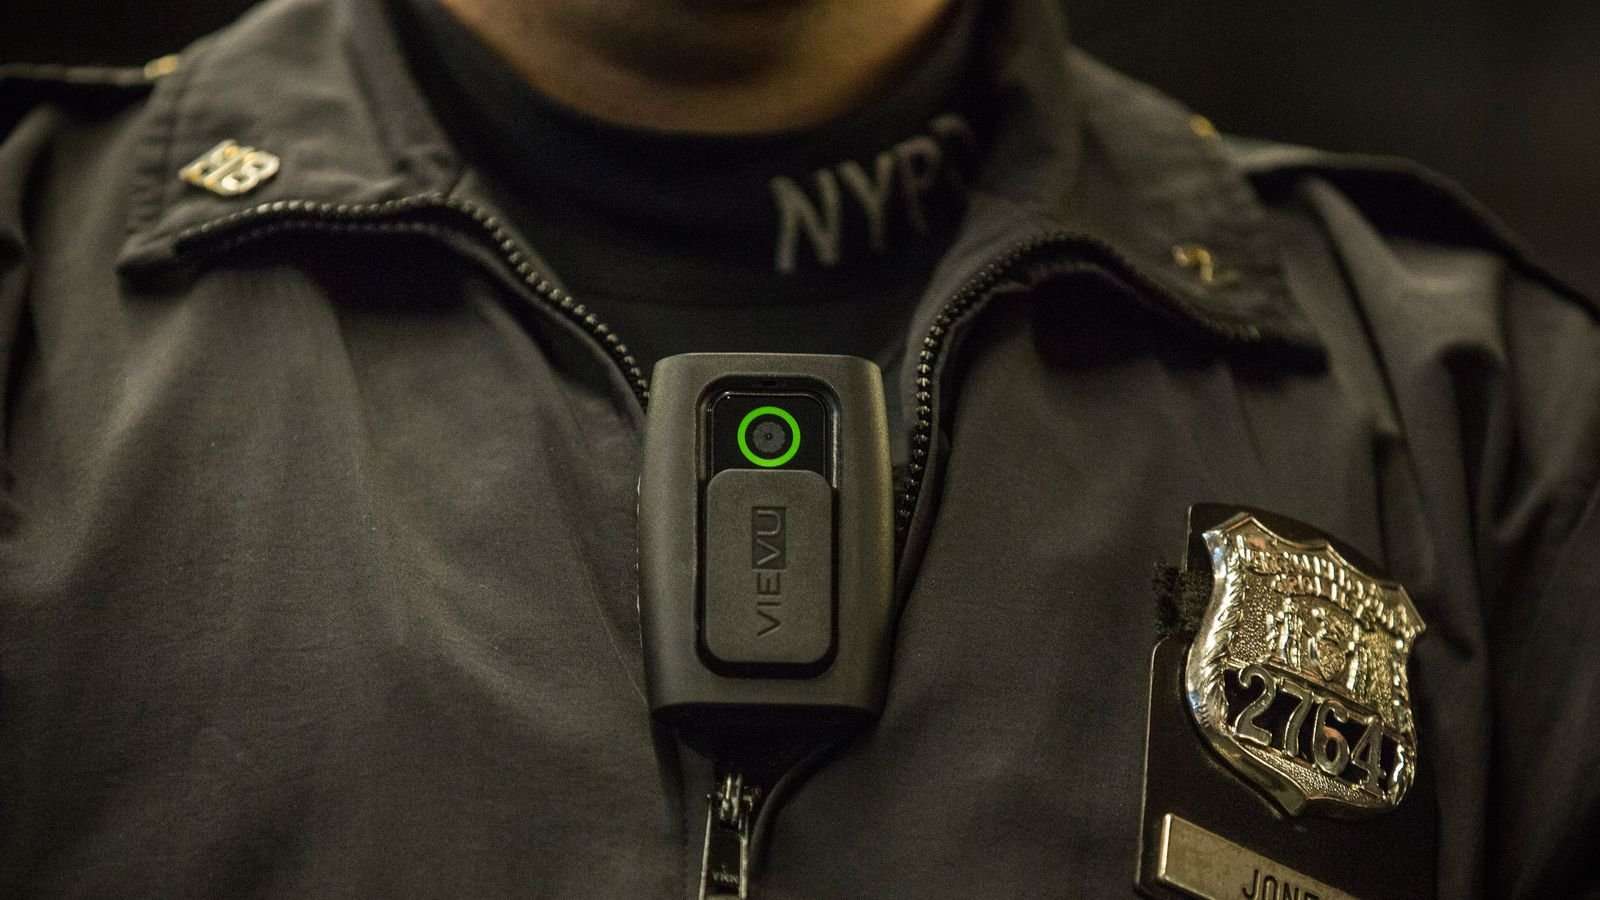 image for New York City has released its proposal to outfit police officers with body cameras